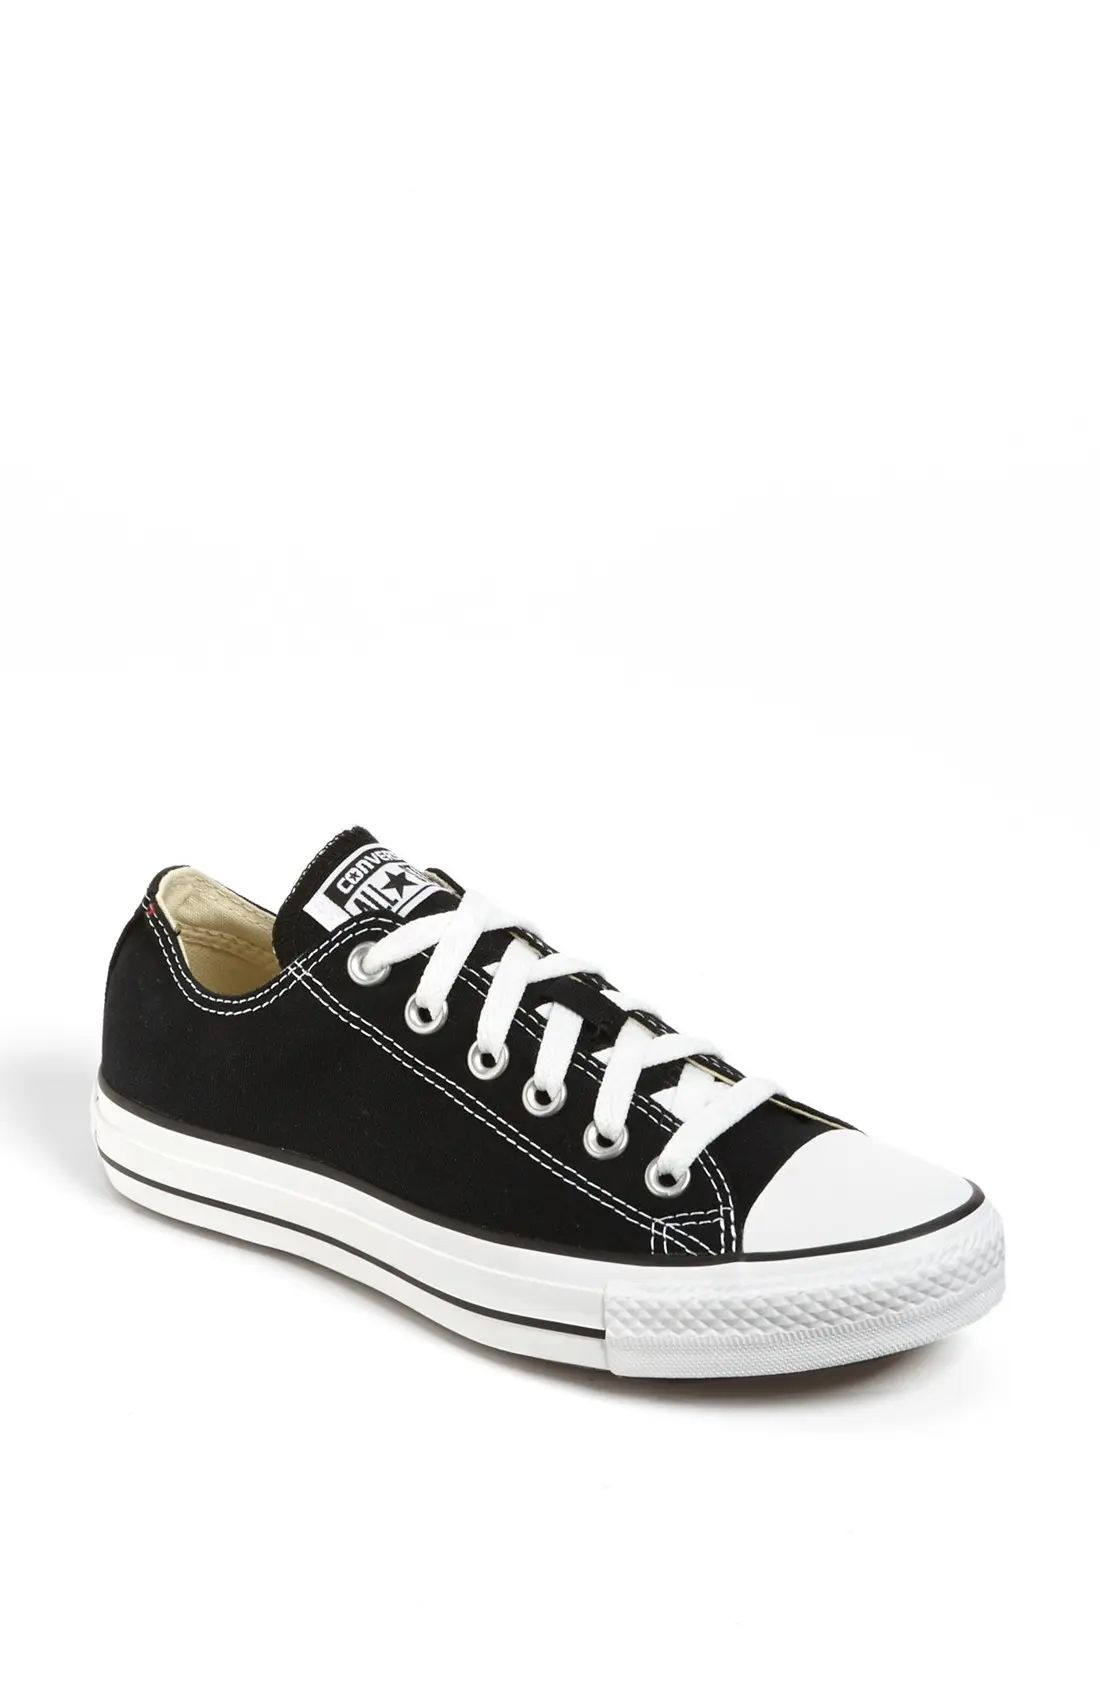 Women's Converse Chuck Taylor All Star Low Top Sneaker, Size 9.5 M - Black | Nordstrom